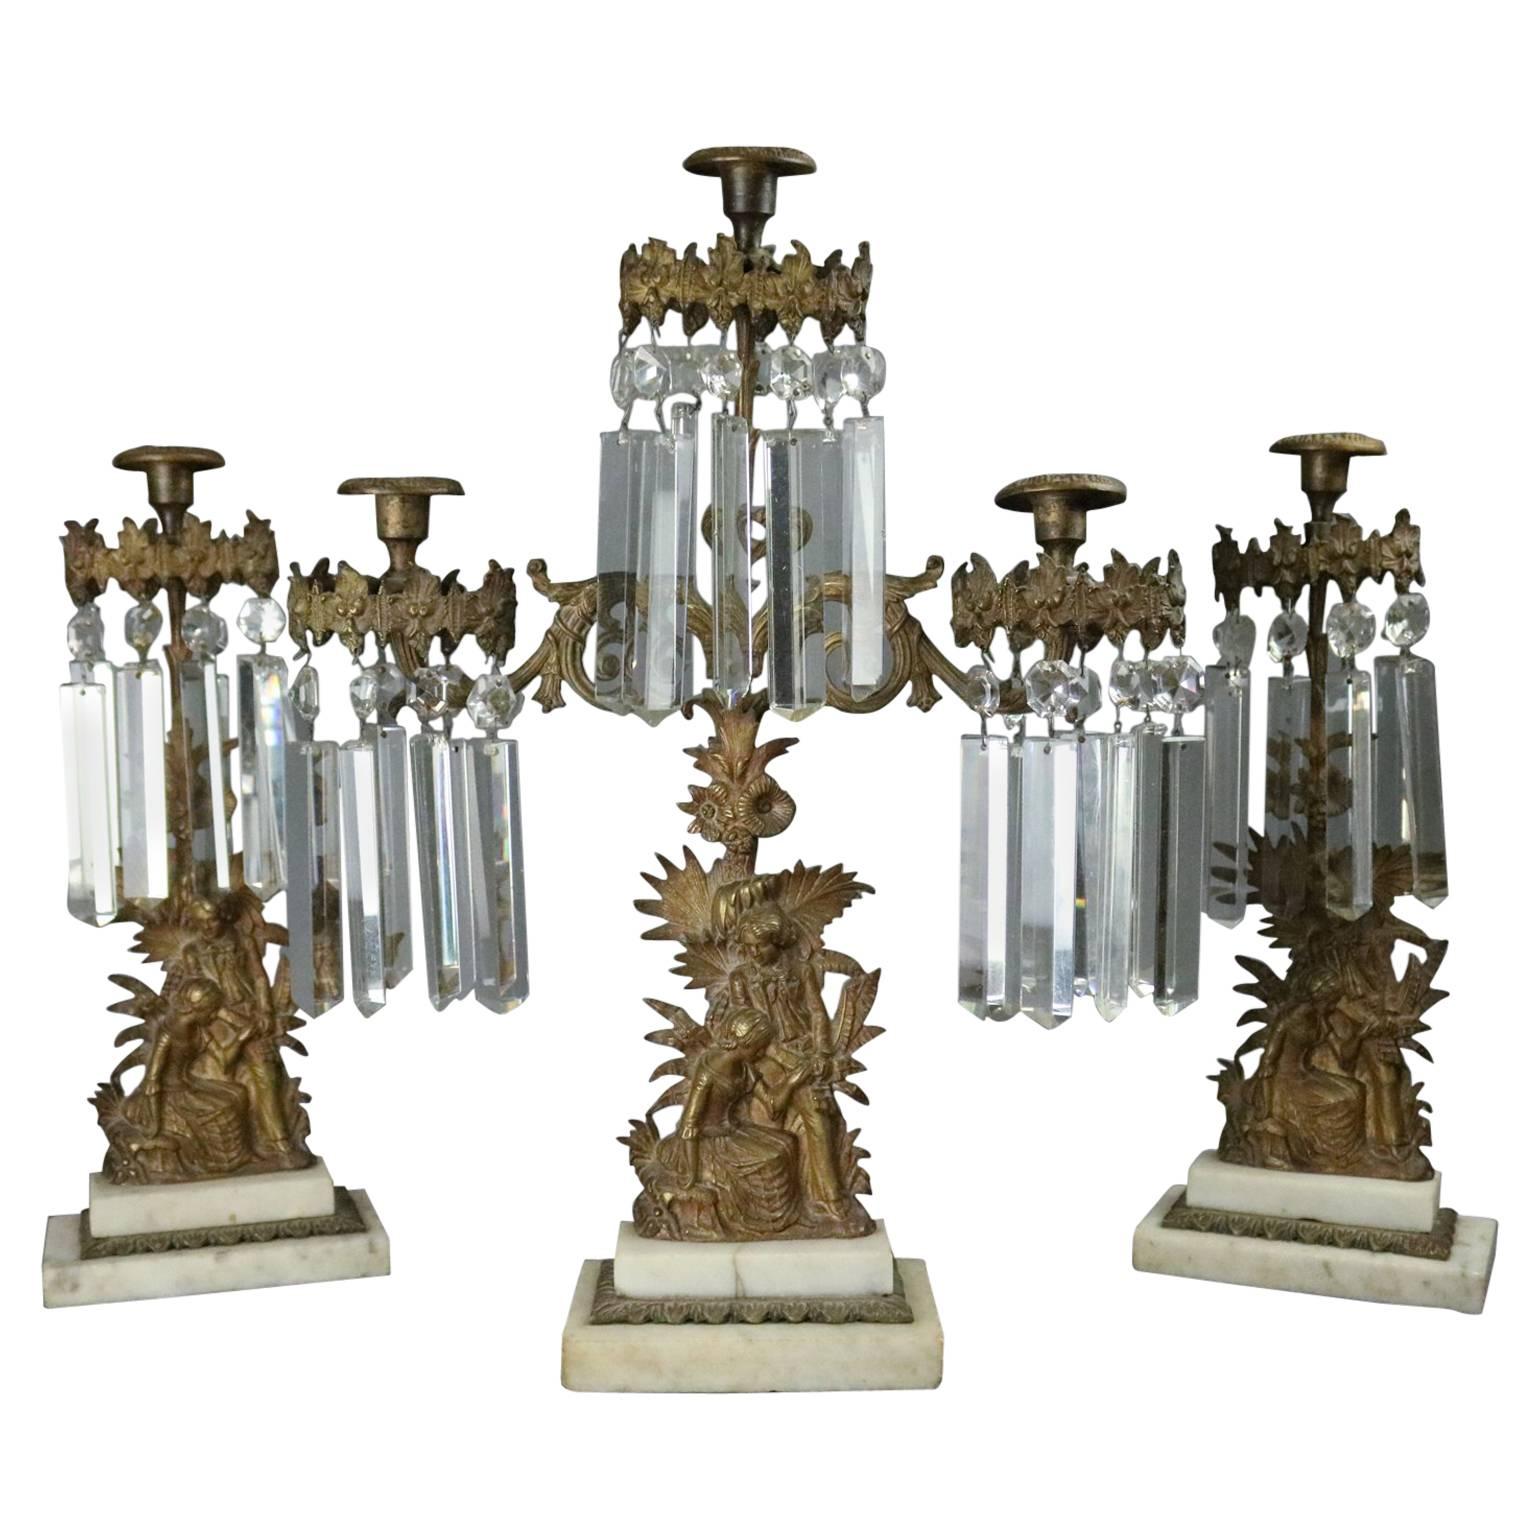 Antique Three-Piece Early Bronze Marble and Crystal Girandole Set Colonial Scene